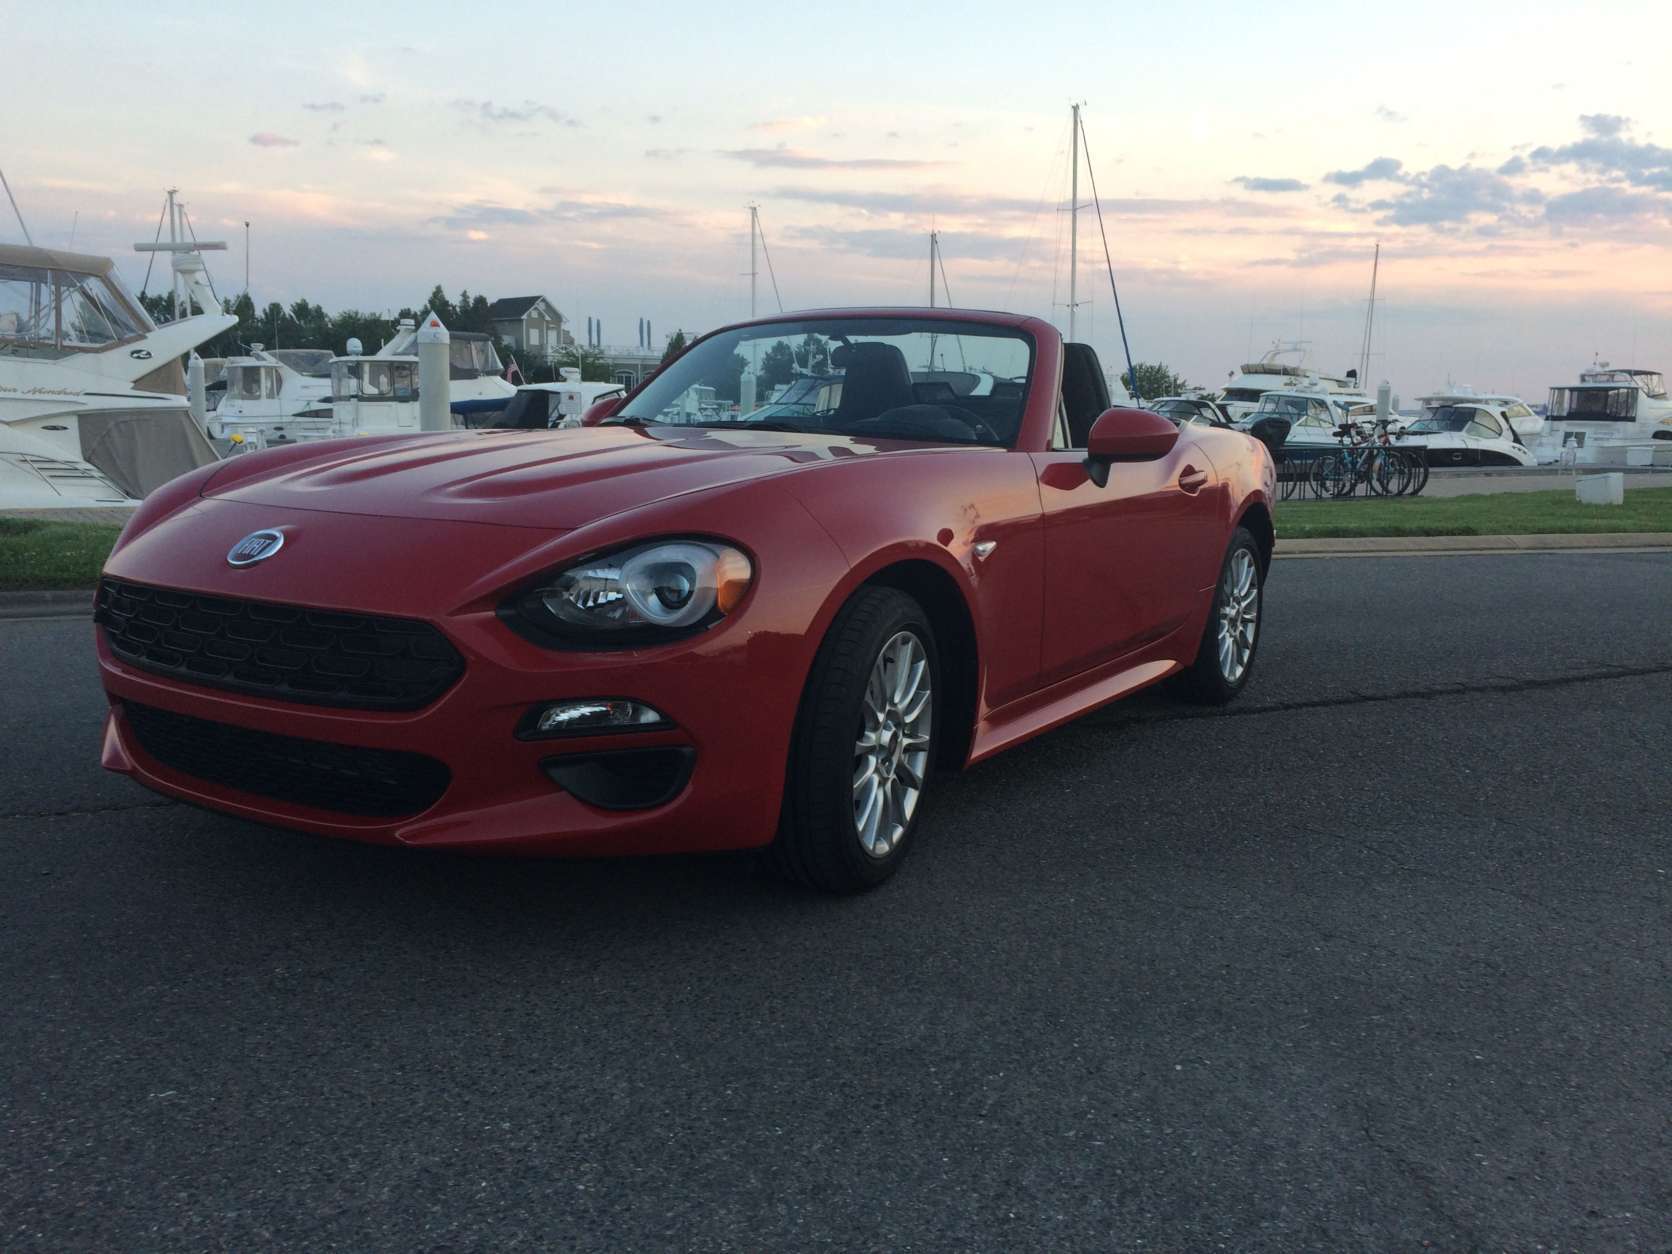 The Fiat 124 Spider front end styling is a bit bigger with a friendly-looking face. (WTOP/Mike Parris) 